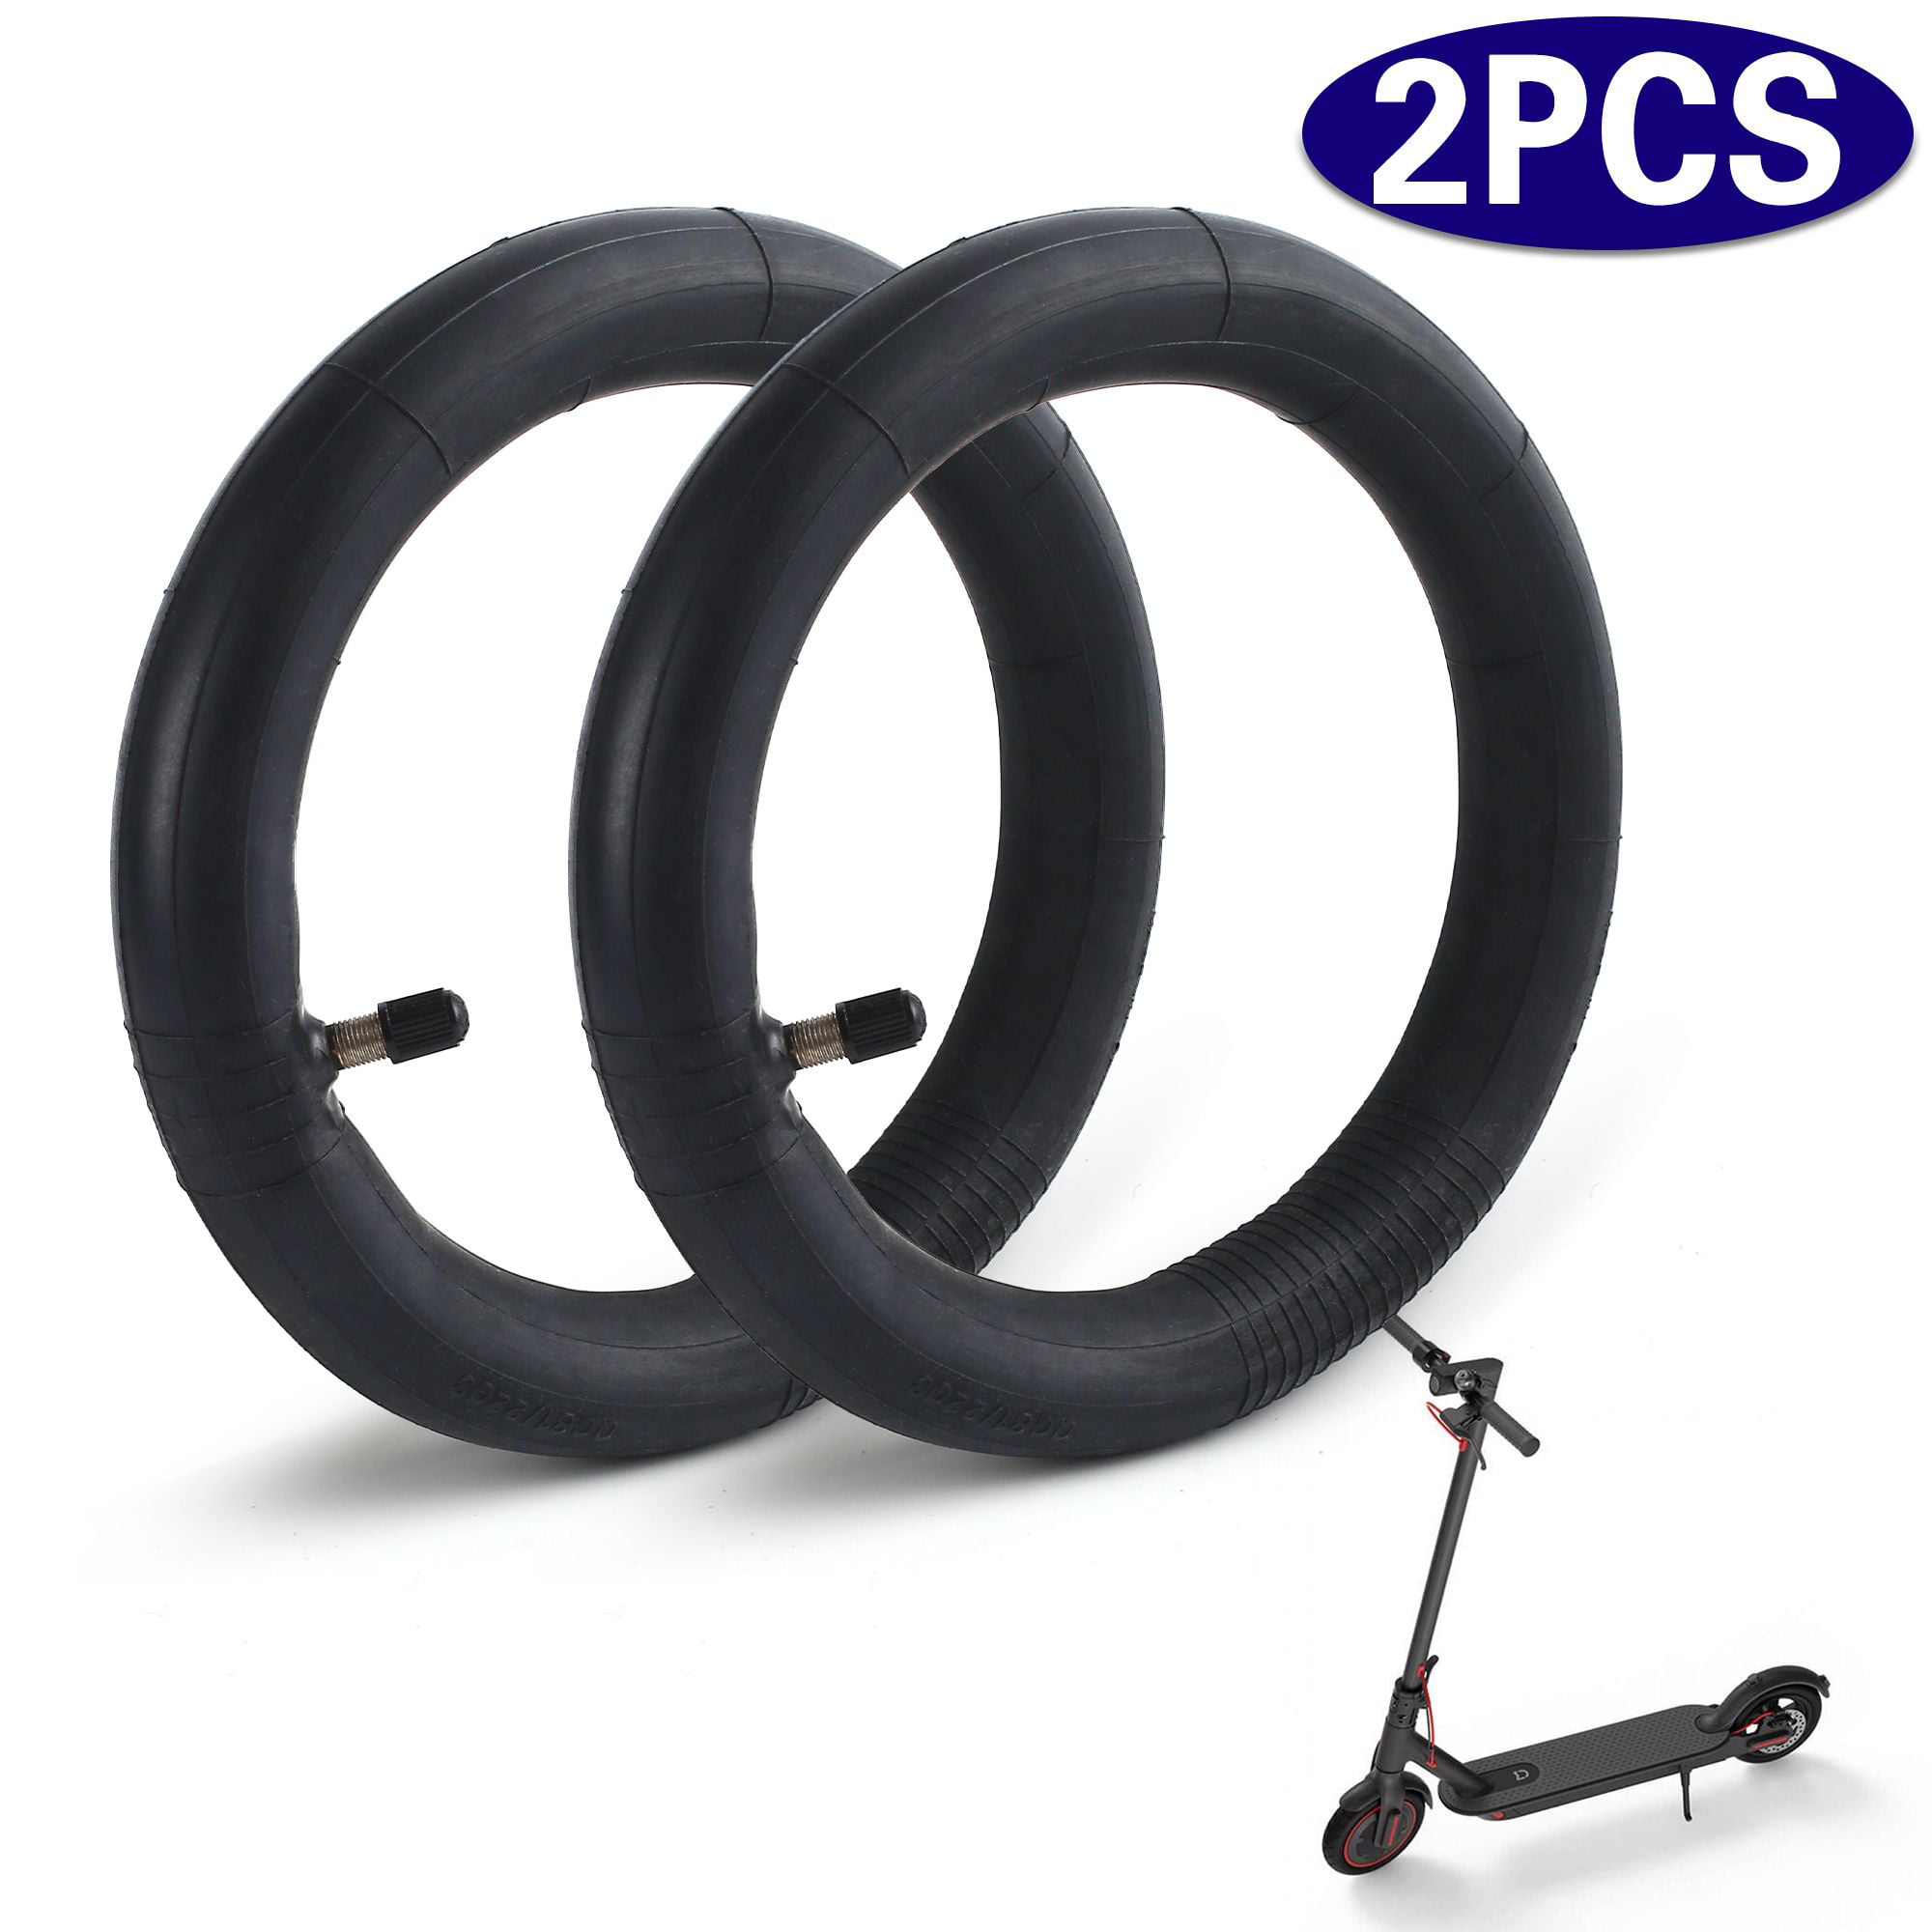 0F25 Inner Tube Tires Tyre Outside Diameter 8.5 Inch For Xiaomi Electric Scooter 